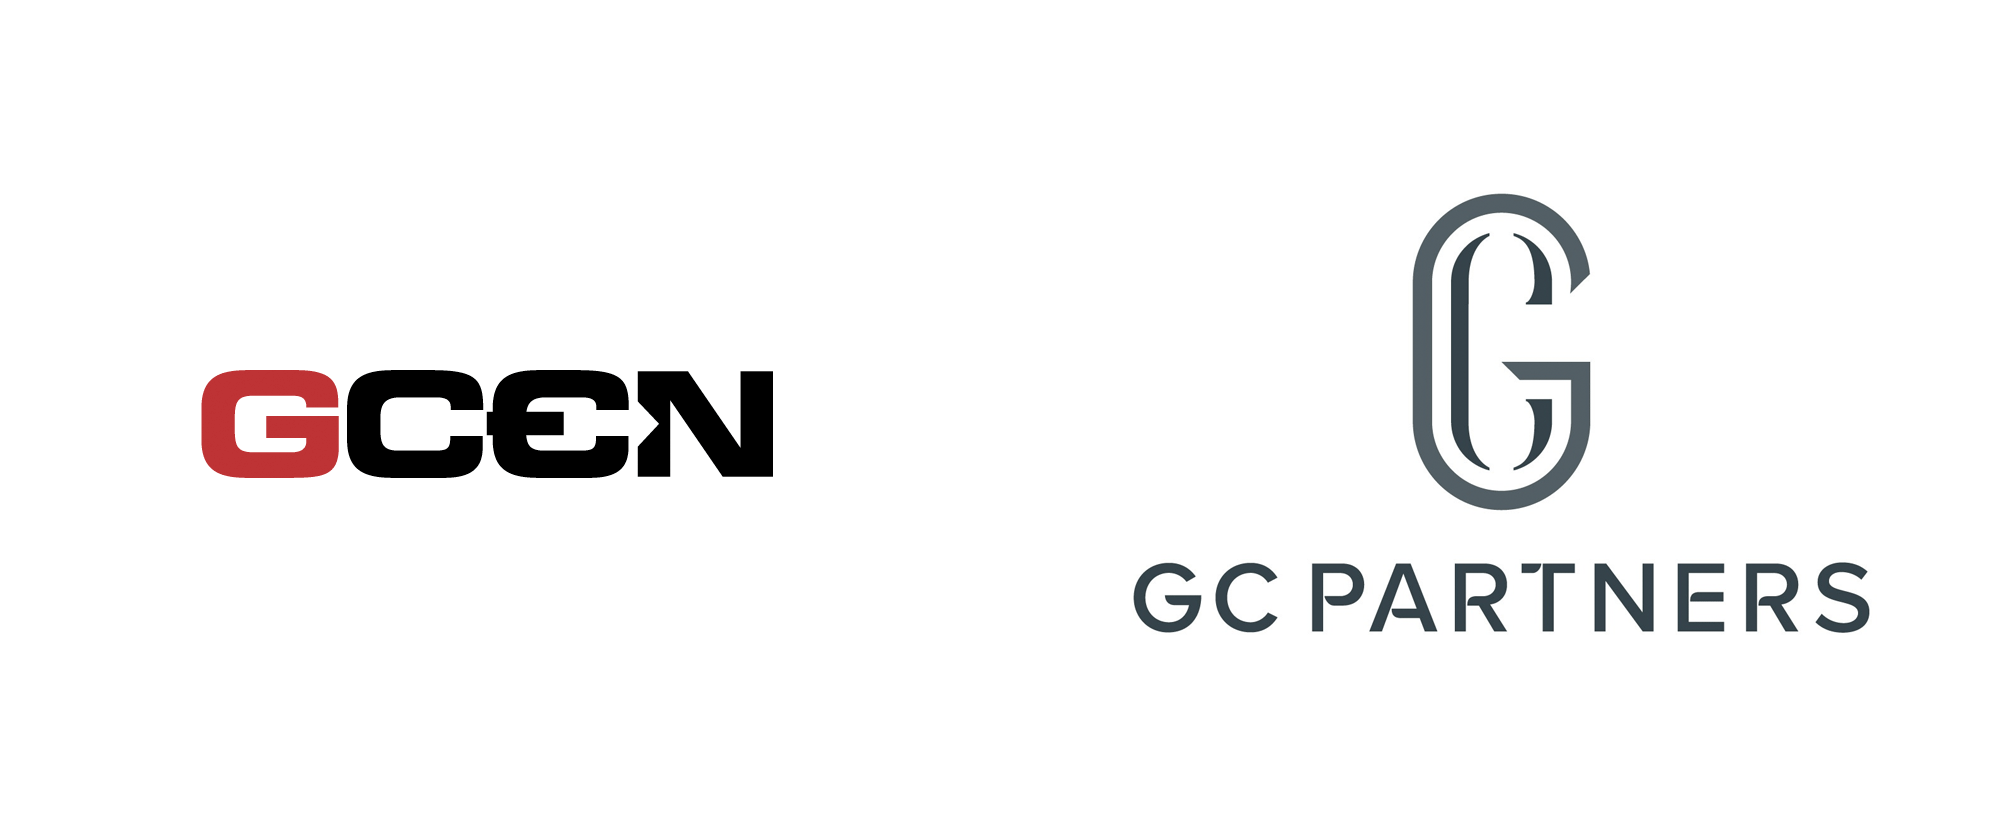 GC Logo - Brand New: New Logo and Identity for GC Partners